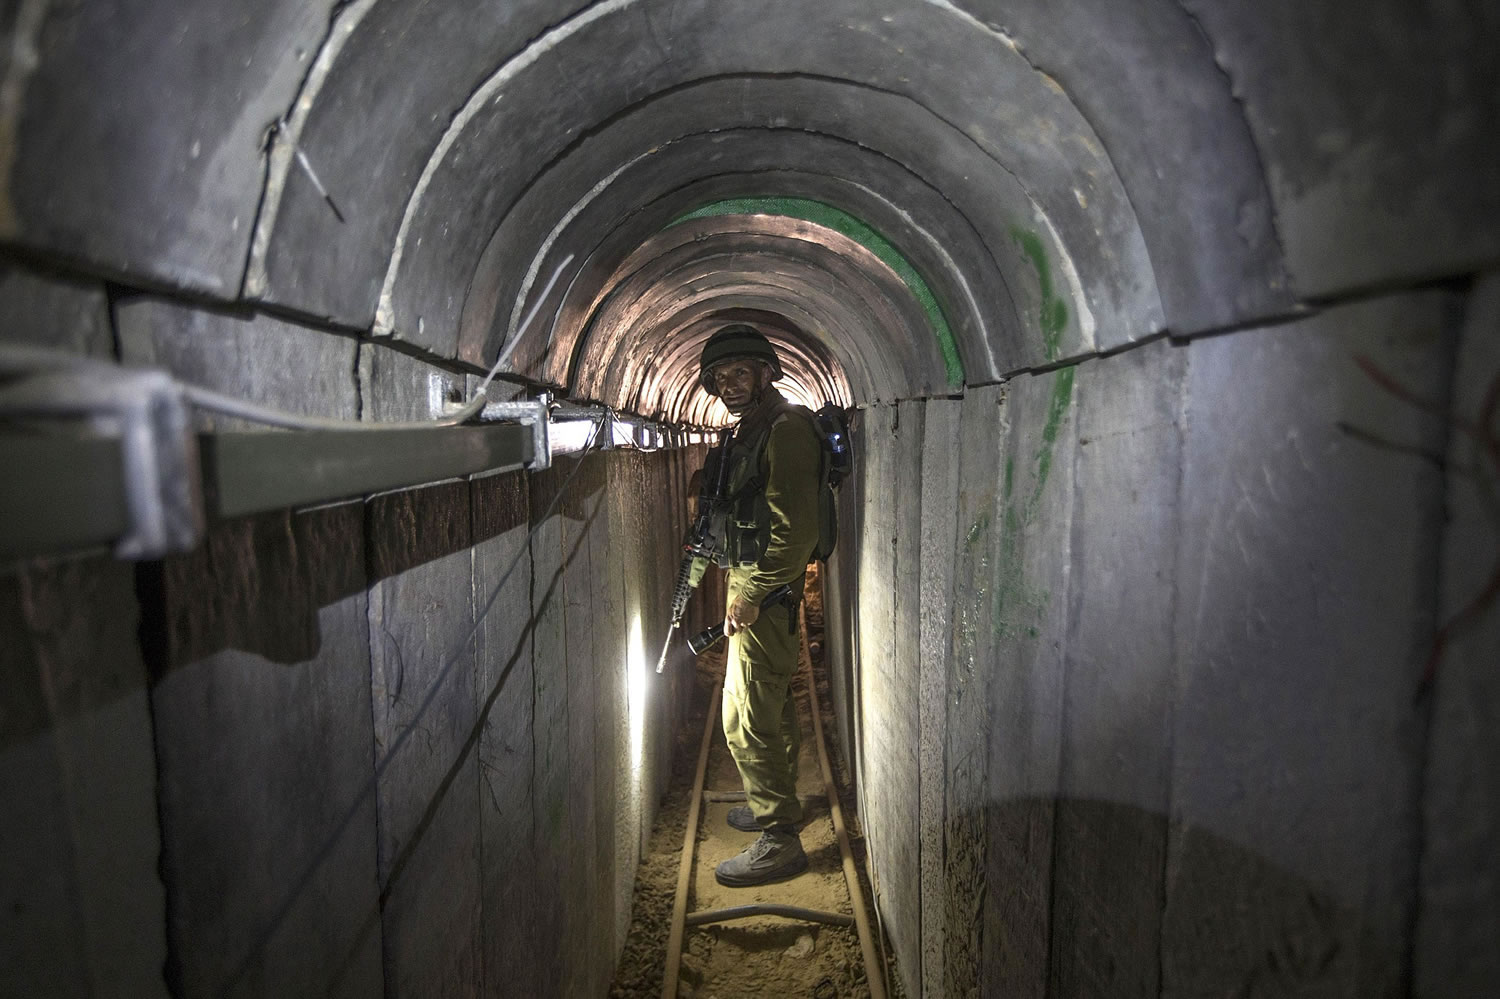 FILE - In this Friday, July 25, 2014 file photo, an Israeli army officer gives journalists a tour of a tunnel allegedly used by Palestinian militants for cross-border attacks, at the Israel-Gaza Border. Hamas is entering Egyptian-brokered talks with Israel over a new border regime for blockaded Gaza having lost hundreds of fighters, two-thirds of its arsenal of rockets, and its attack tunnels.